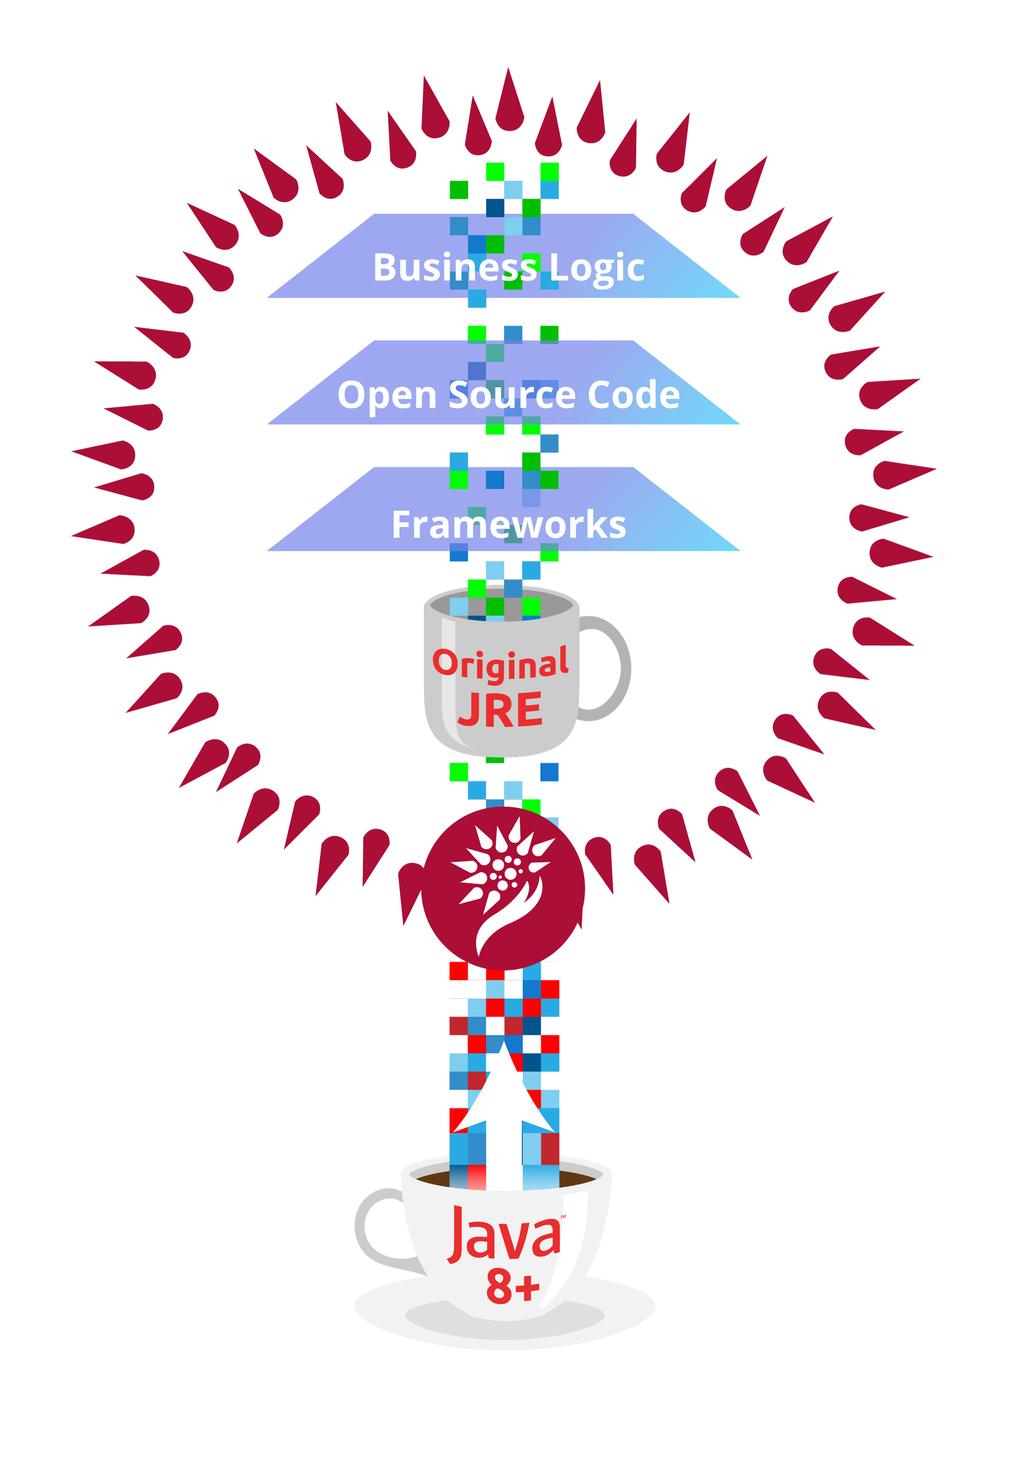 Out-of-Support Applications Businesses often struggle to update out-of-support Java applications that are incompatible with newer versions of Java.